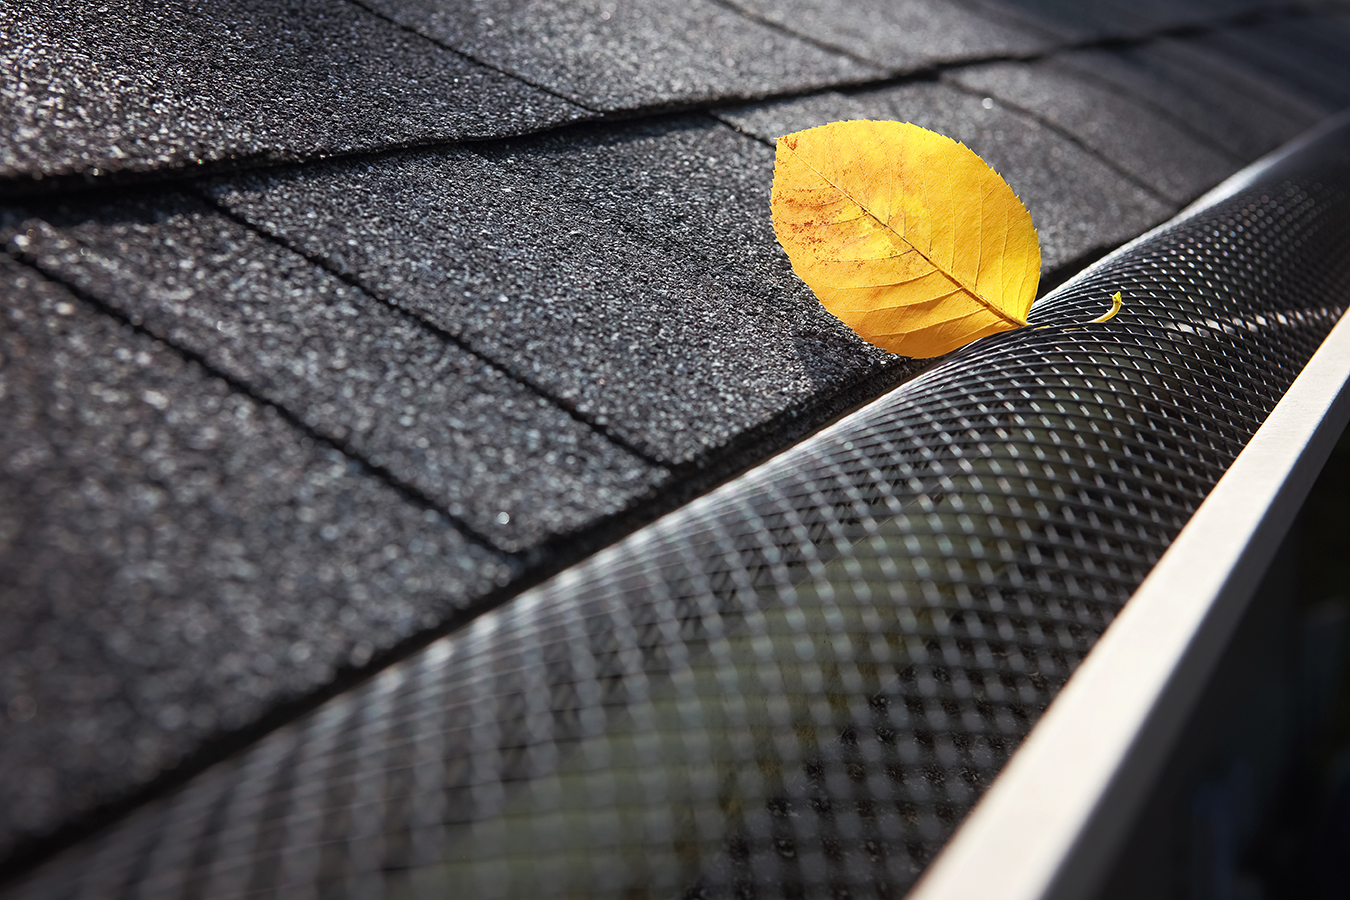 The level of knowledge it takes to properly install a gutter guard varies depending on what type of guard your gutters need.